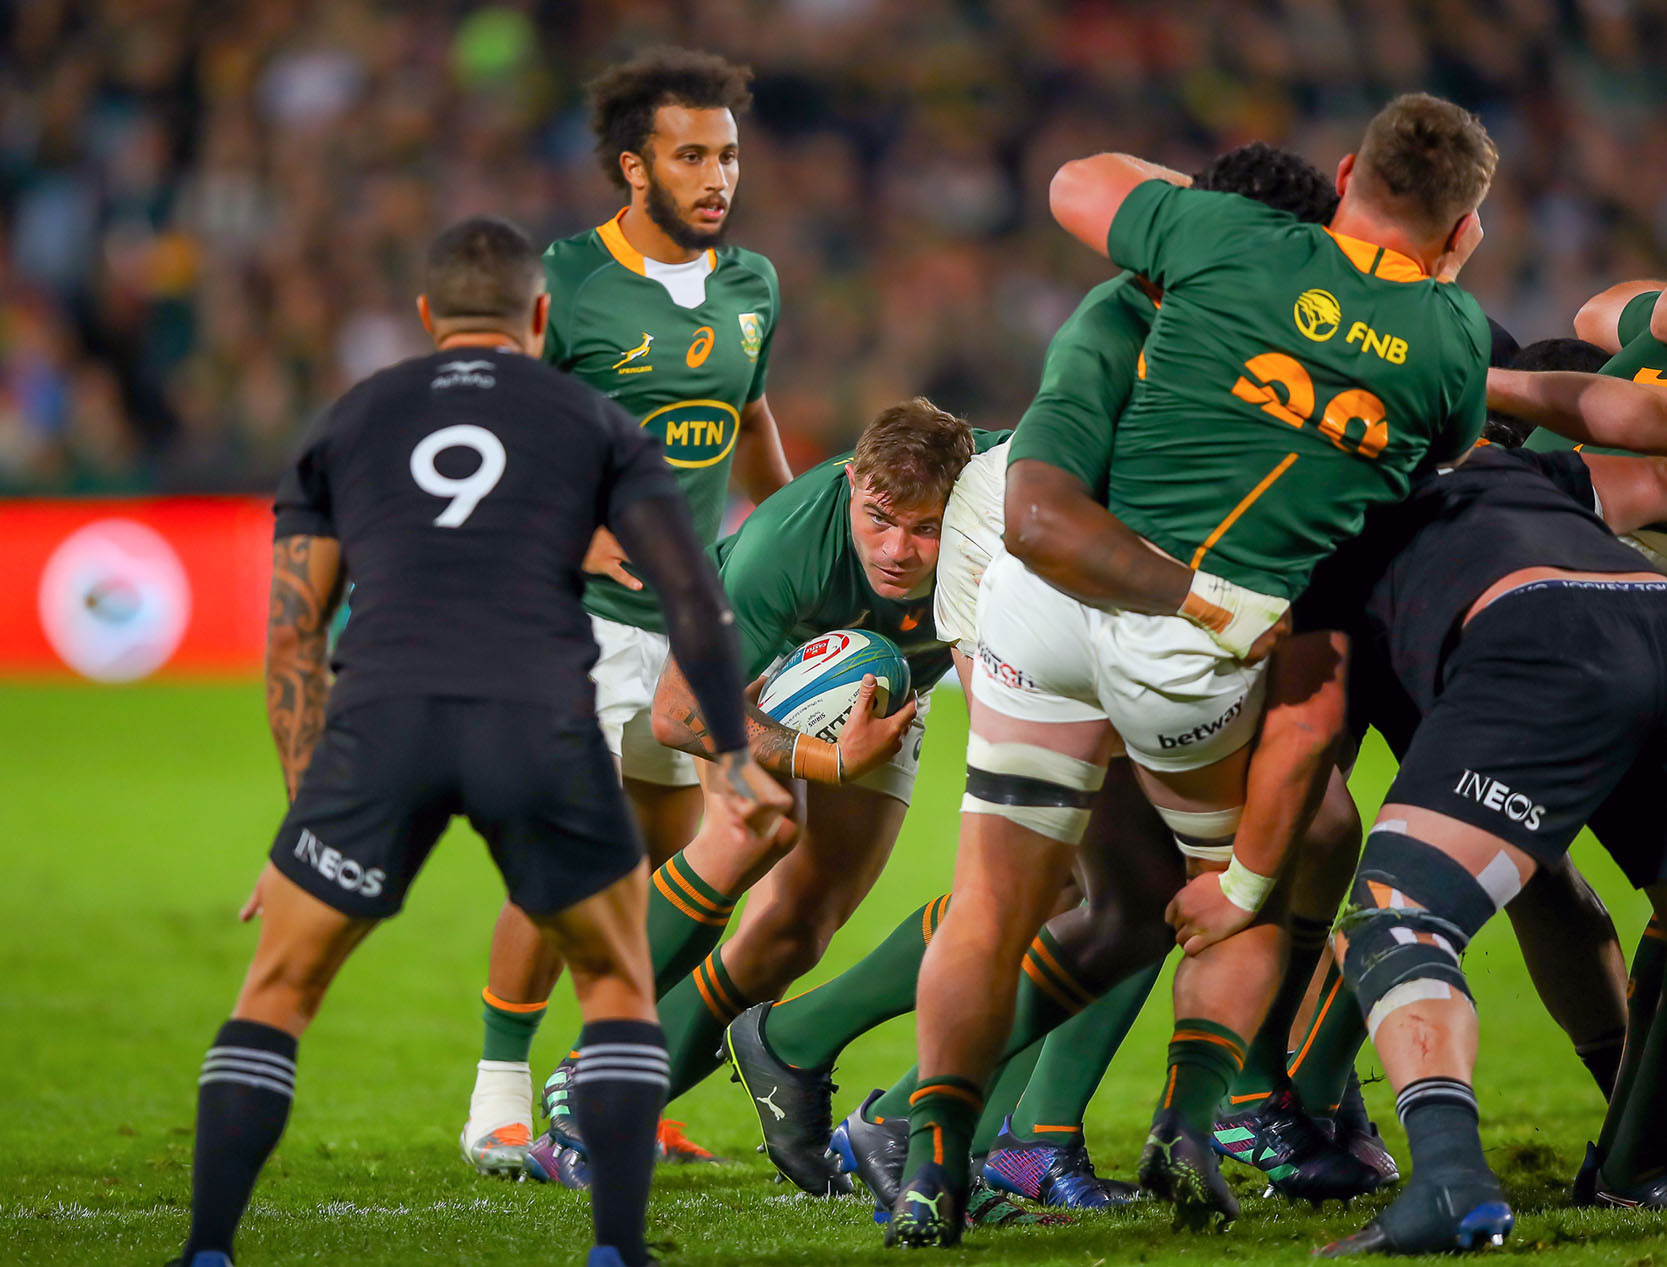 Relentless rugby schedule poses a danger to top Springboks